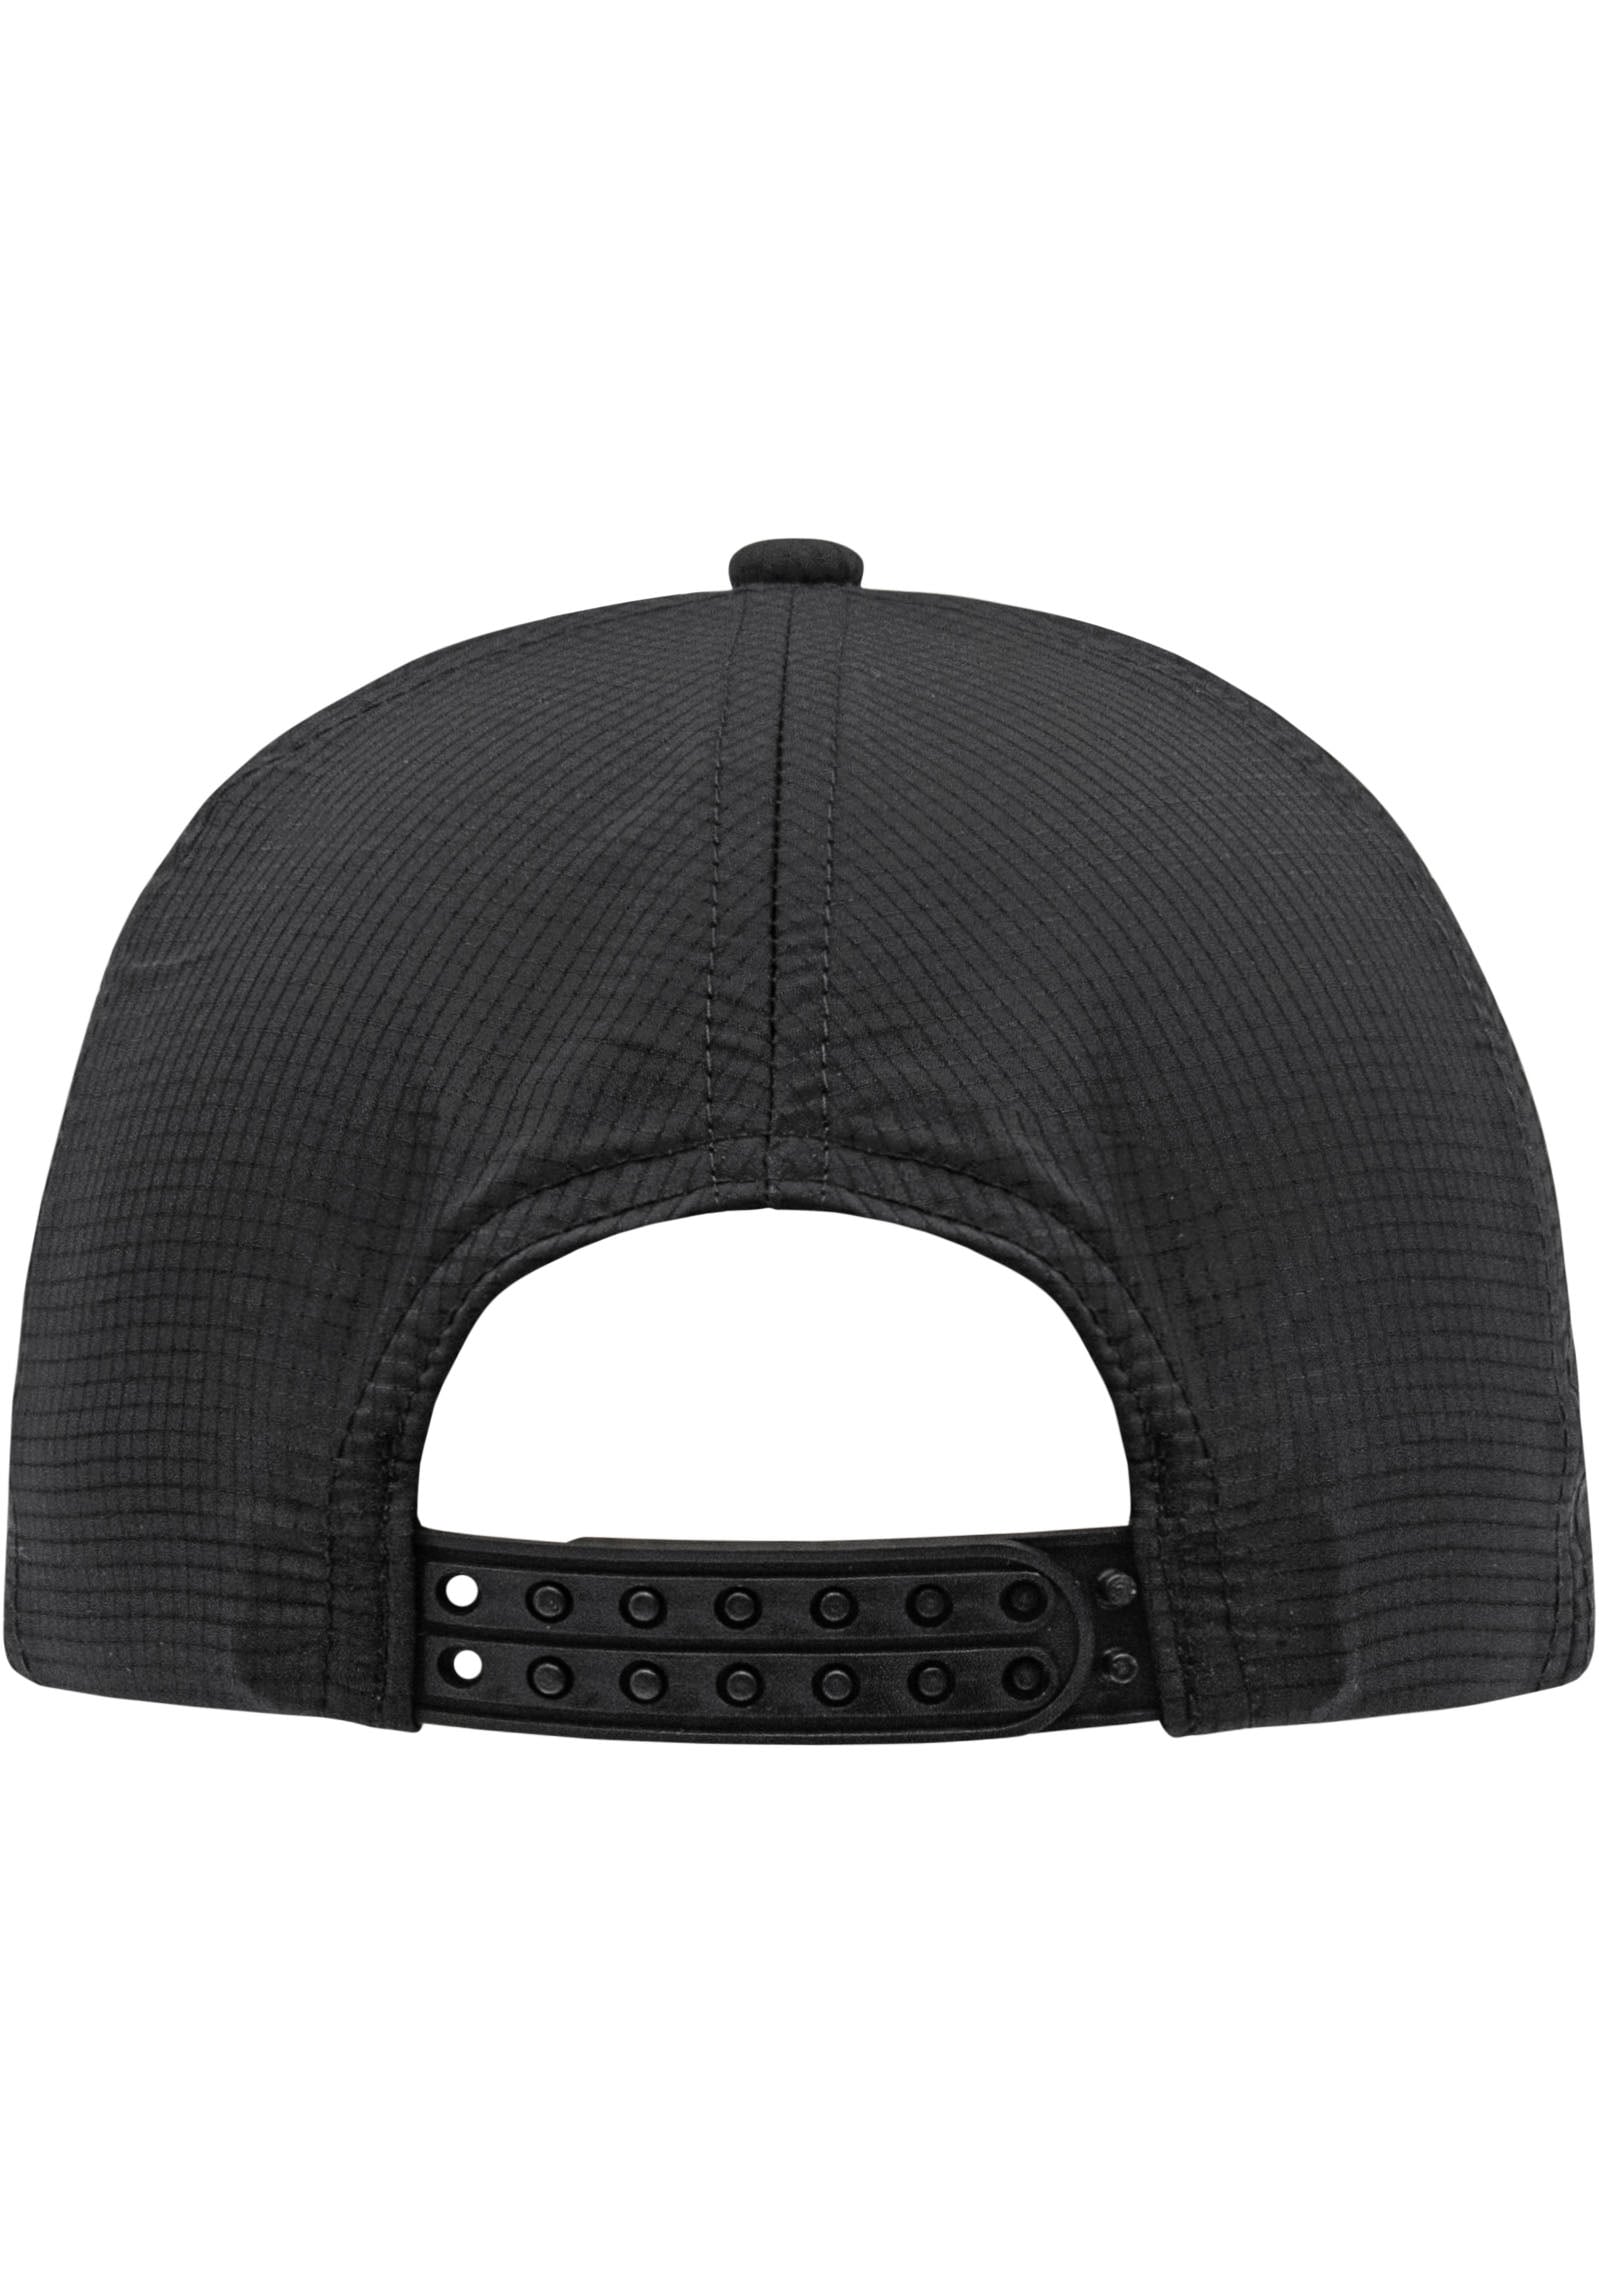 chillouts Baseball Cap, Langley Hat UNIVERSAL online bei